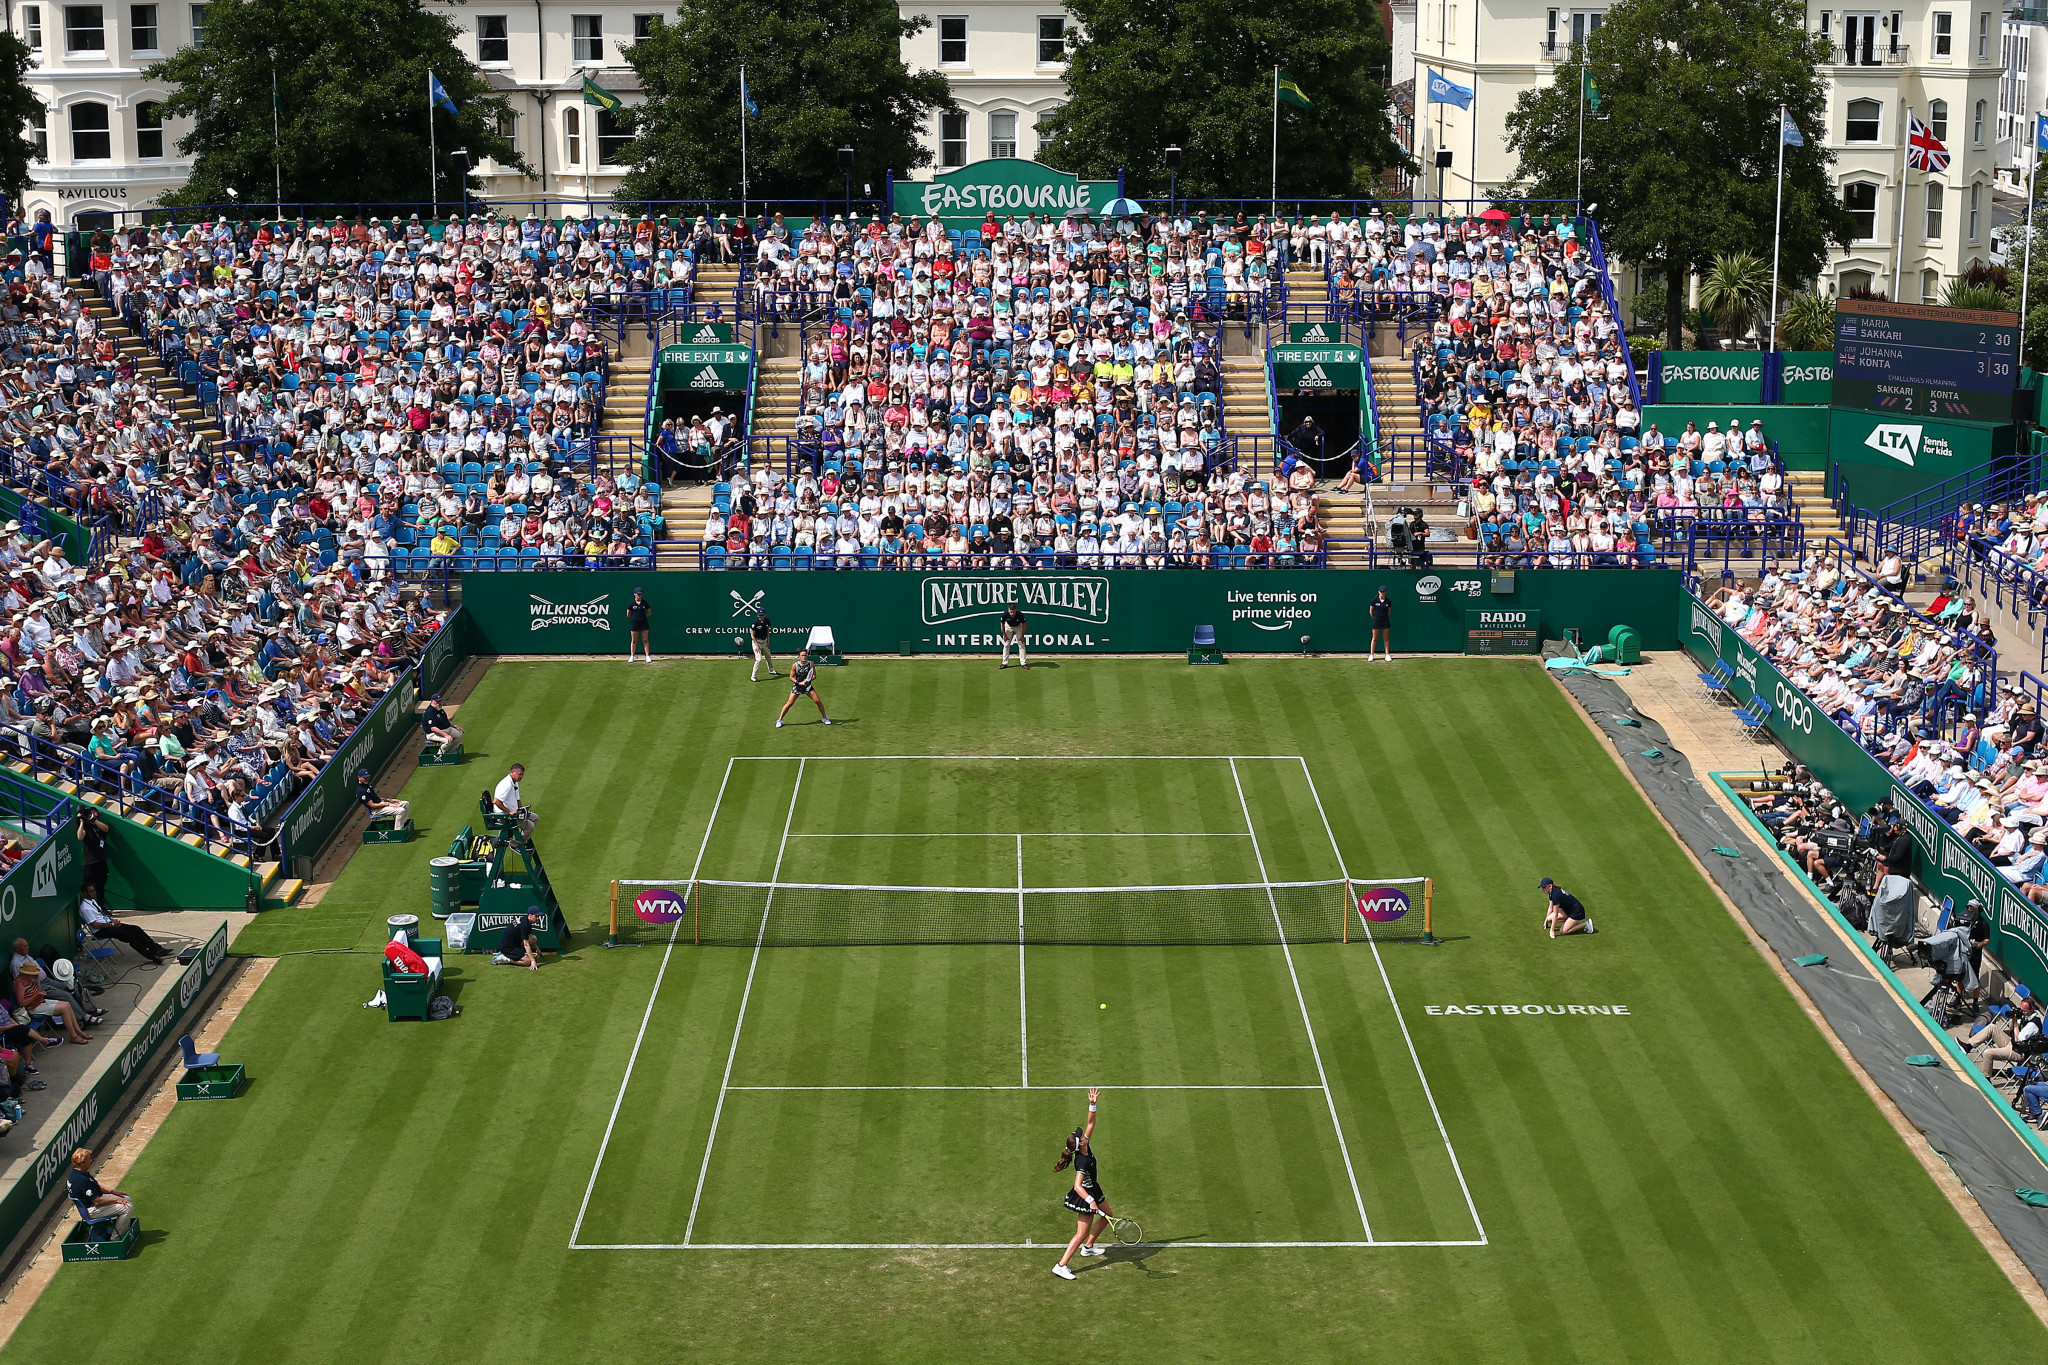 Russian and Belarusian players are not due to play at the Queen's Club Championships or Eastbourne International after being banned in response to the invasion of Ukraine ©Getty Images